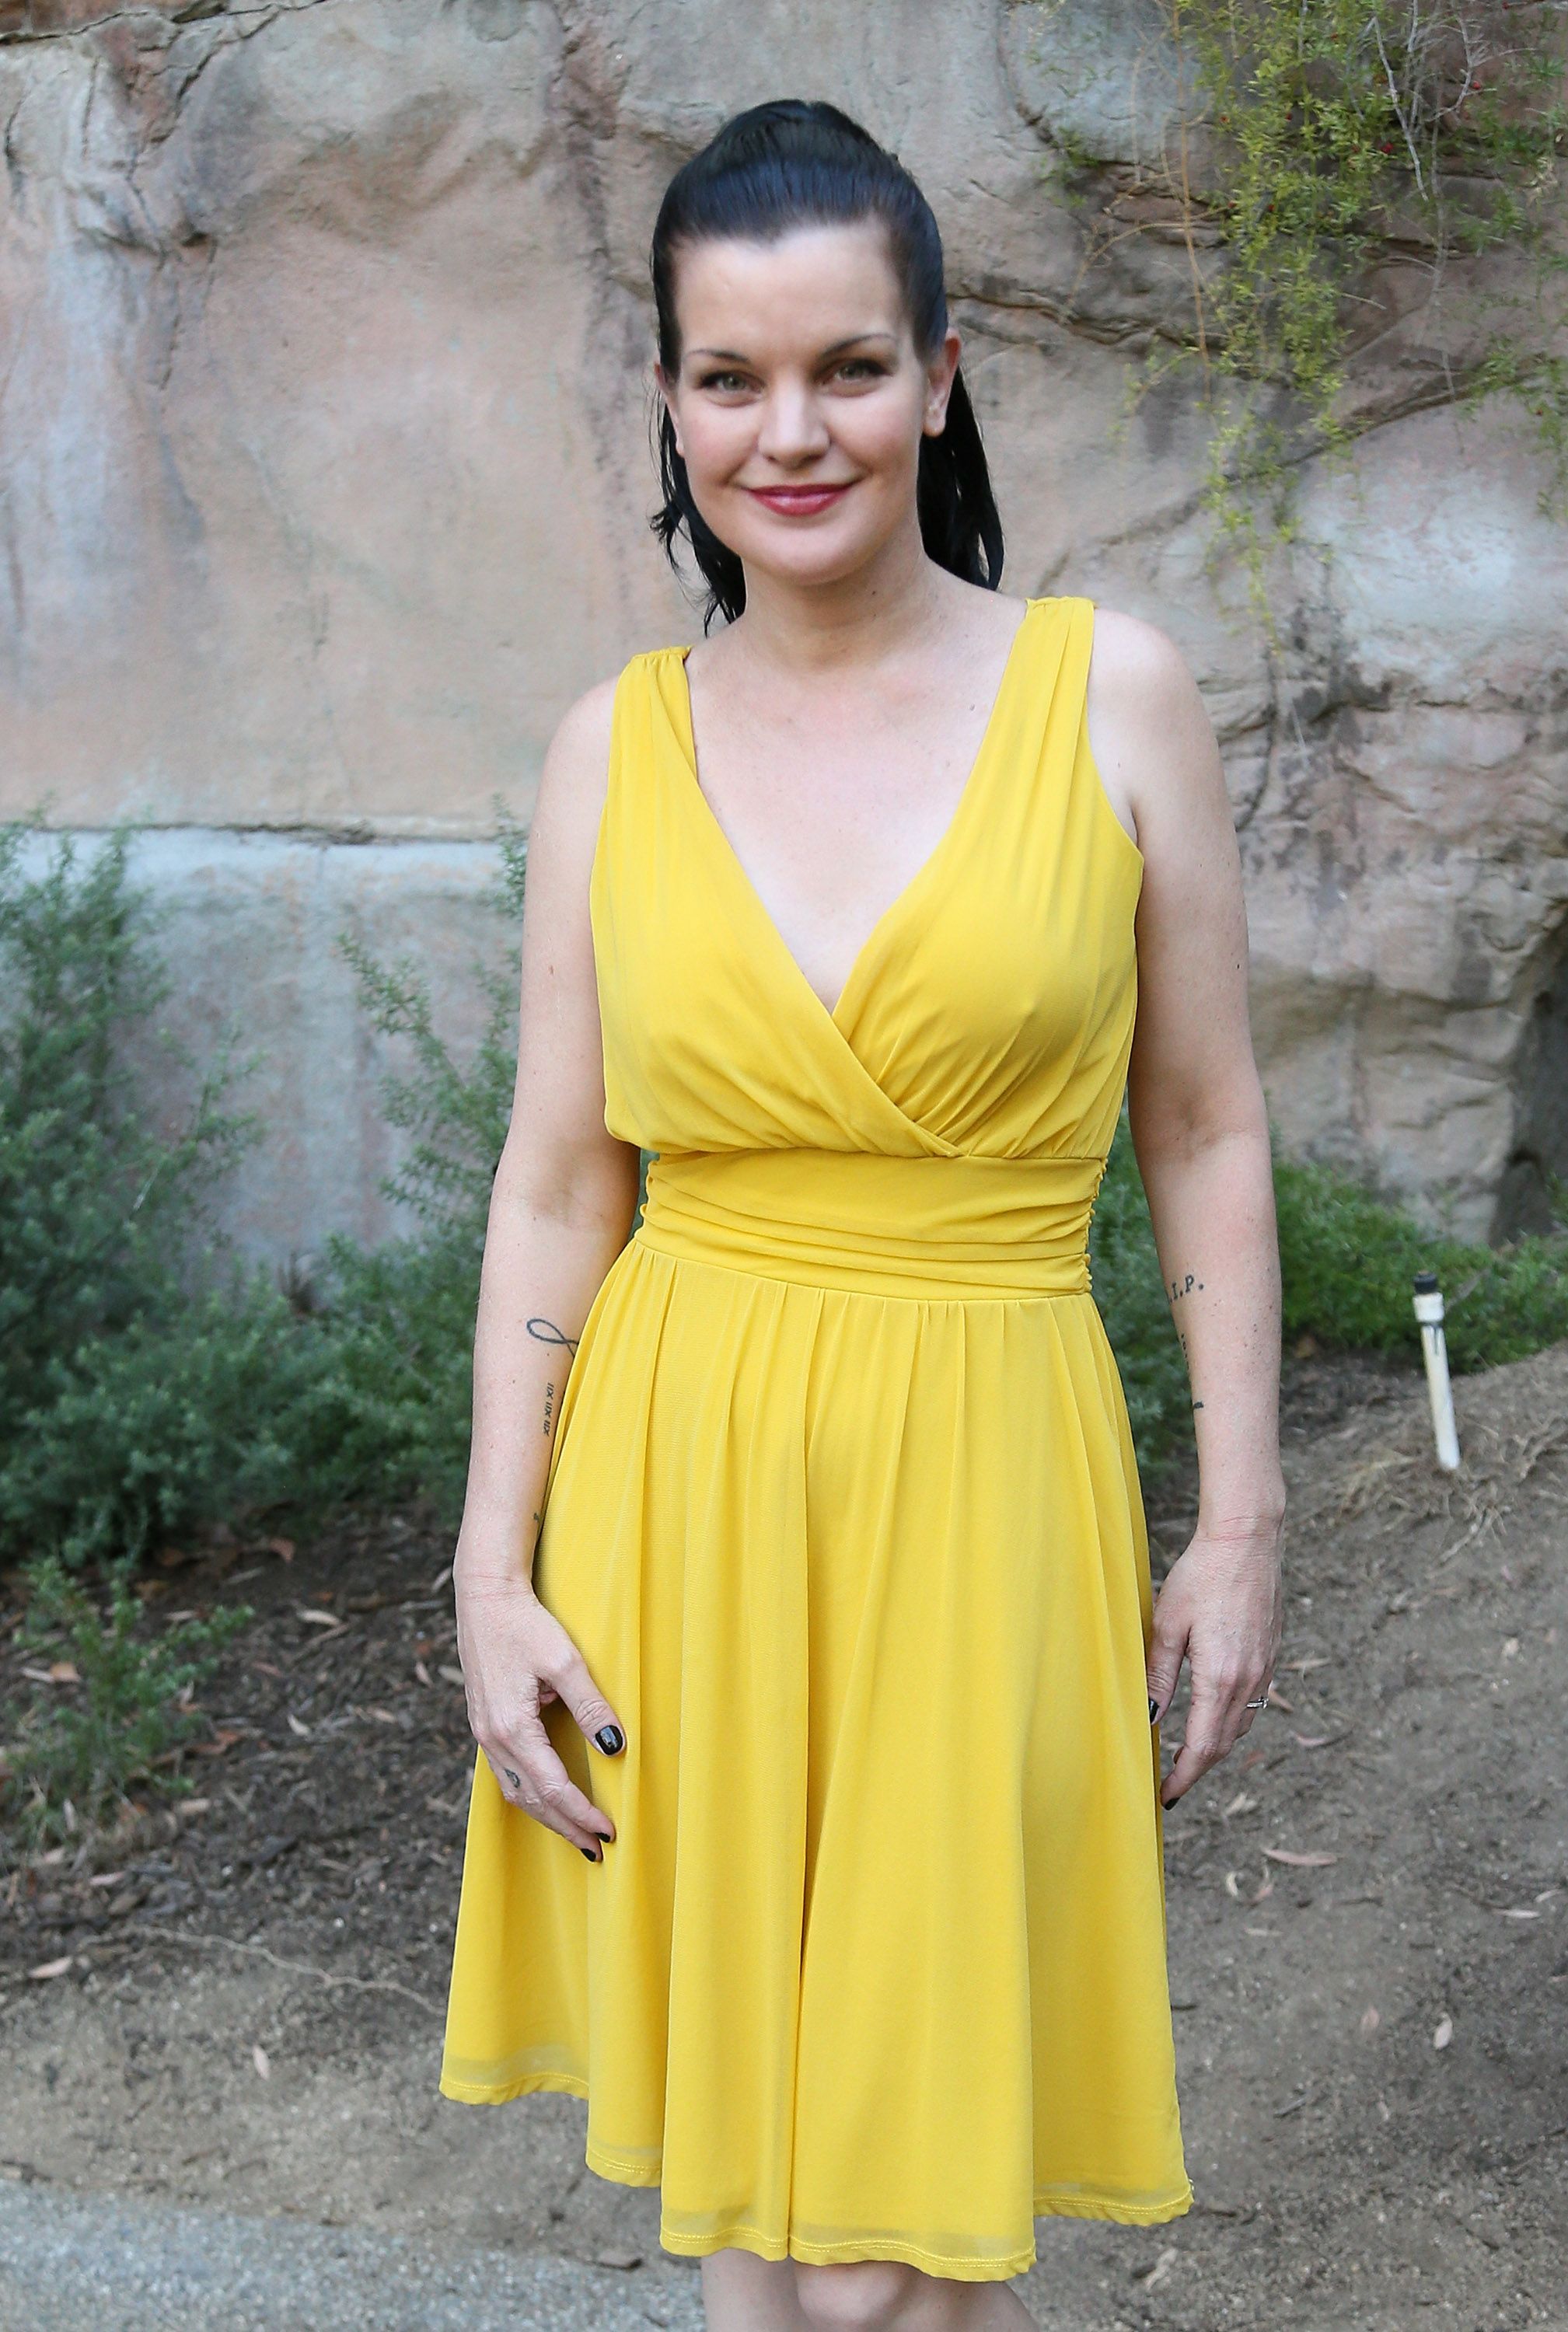 Pauley Perrette at the Greater Los Angeles Zoo Association's (GLAZA) 45th Annual Beastly Ball on June 20, 2015, in Los Angeles, California | Photo: David Livingston/Getty Images